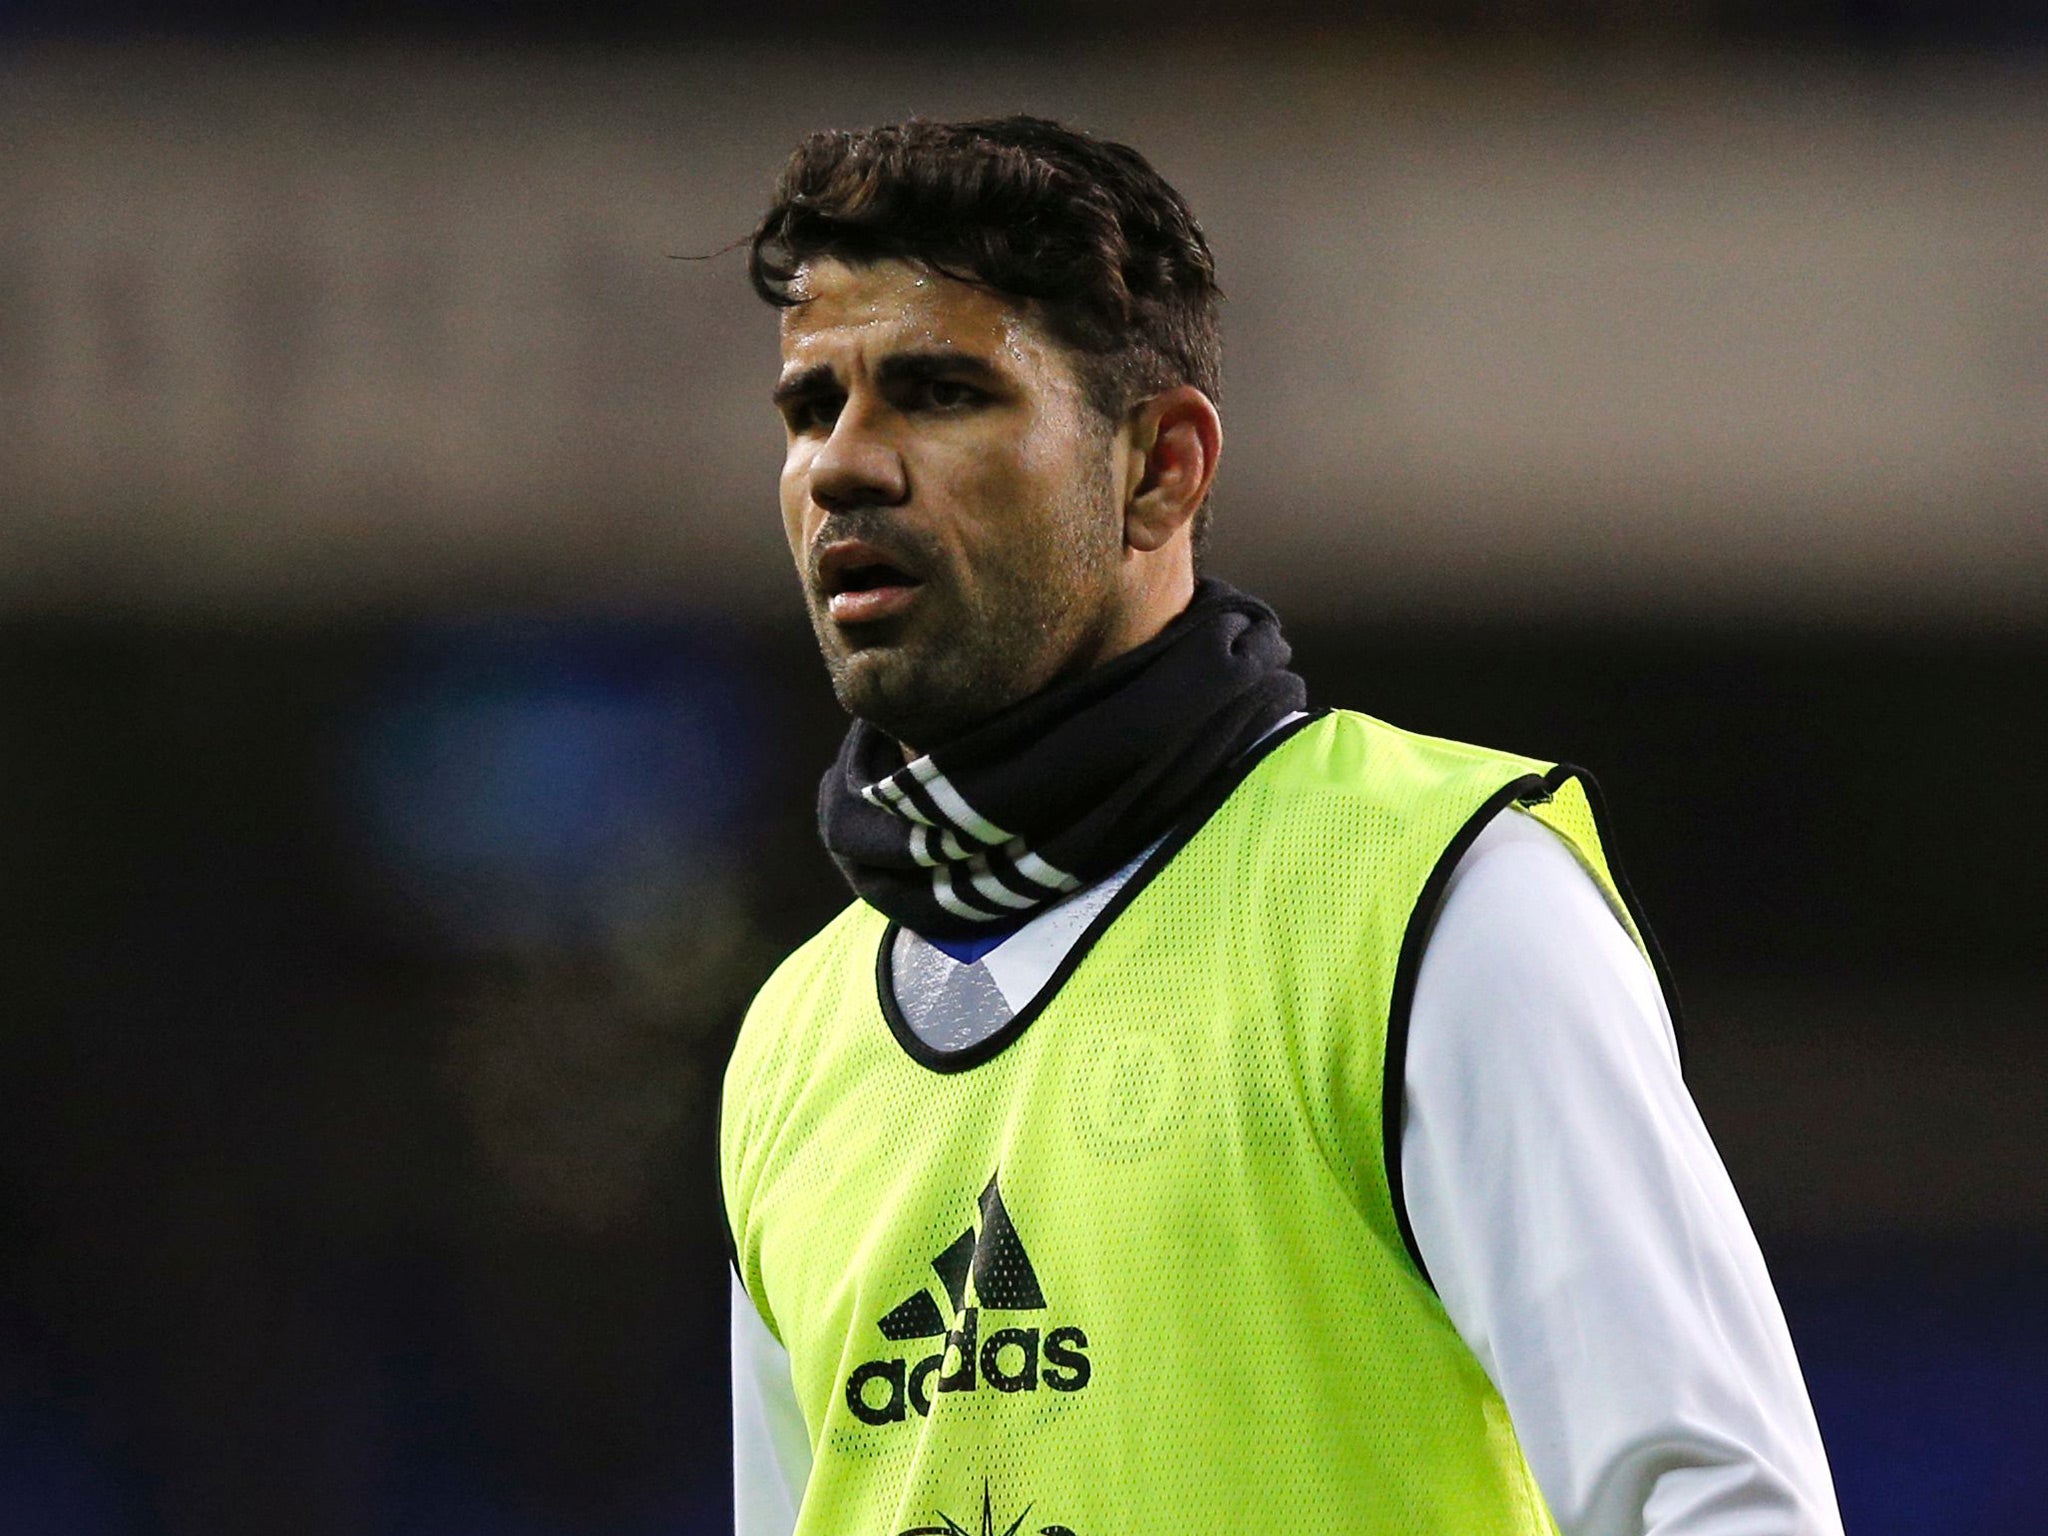 Diego Costa returned to first team training following two days off